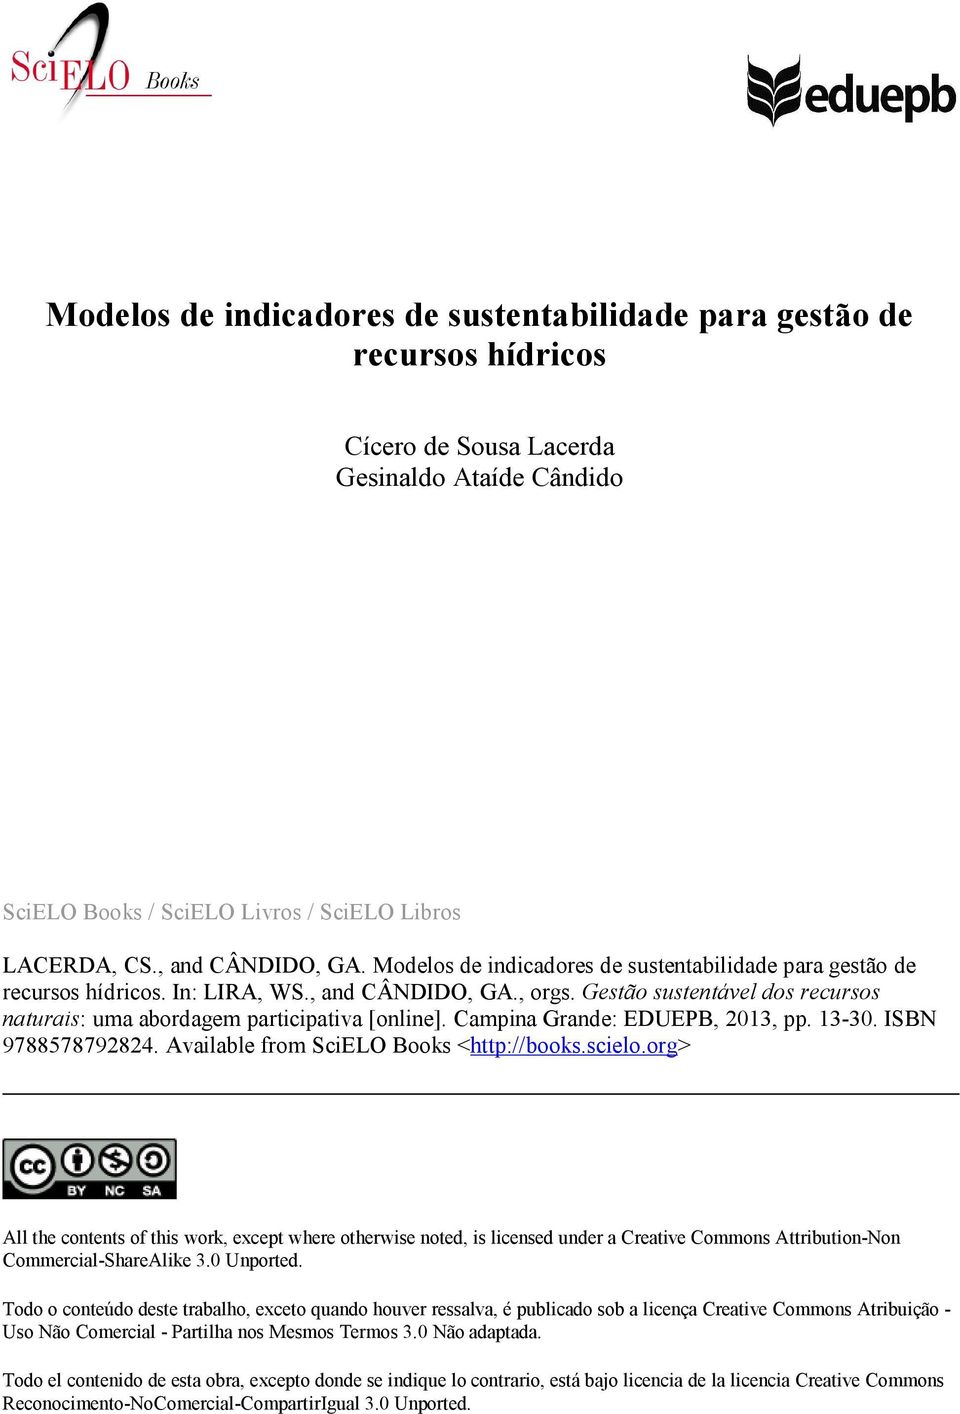 Campina Grande: EDUEPB, 2013, pp. 13-30. ISBN 9788578792824. Available from SciELO Books <http://books.scielo.